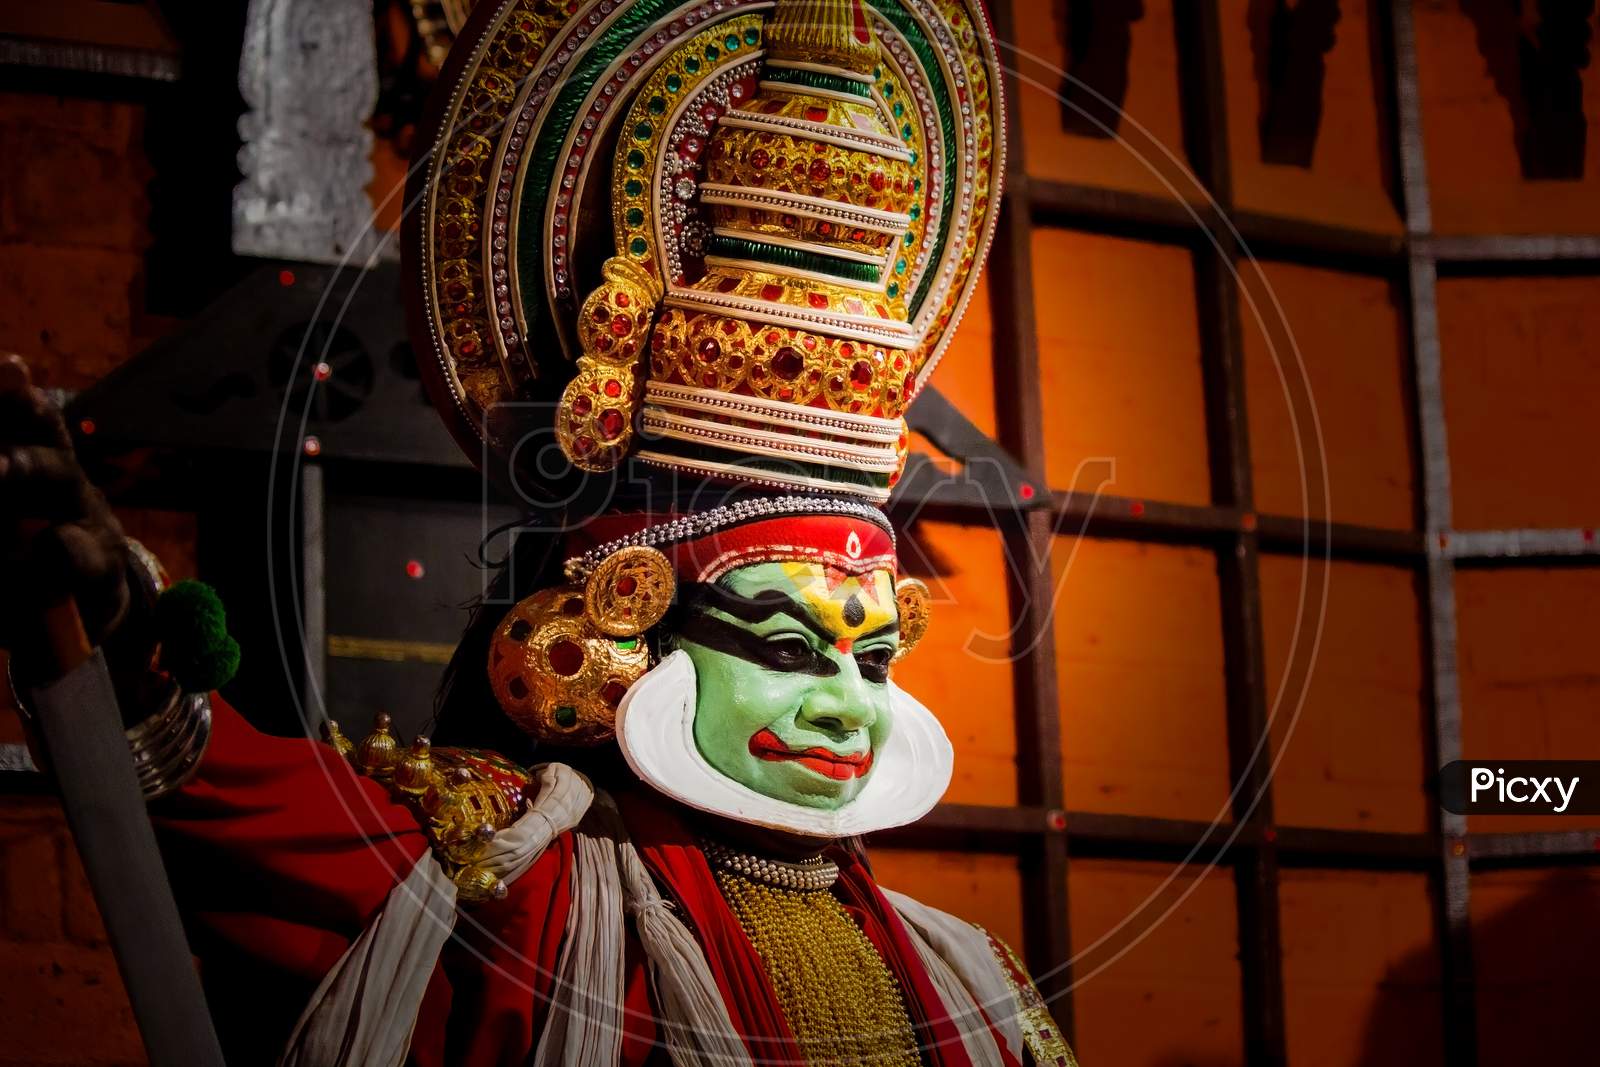 Kochi, India - March 15, 2014: An Indian Classical Dance Form Named Kathakali Artists Tells Indian Mythological Stories Through Numerous Gestures Techniques And Emotions In Front Of Several European Tourists.